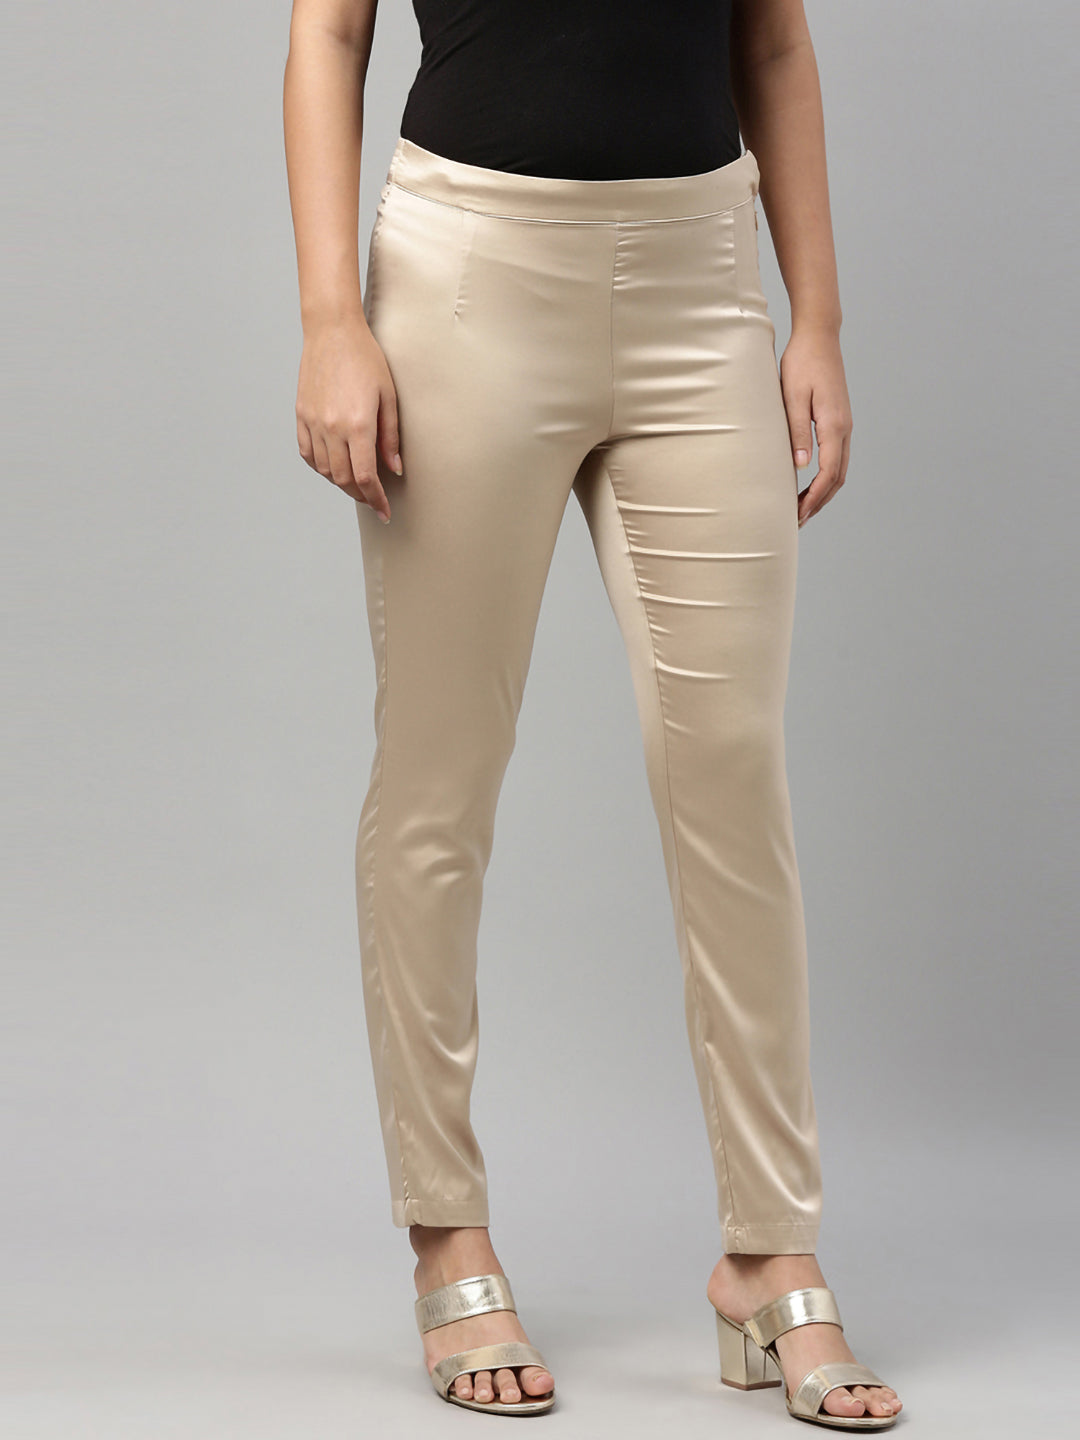 Shiny Skinny Leggings with Zipper - Stretch Active High Waist